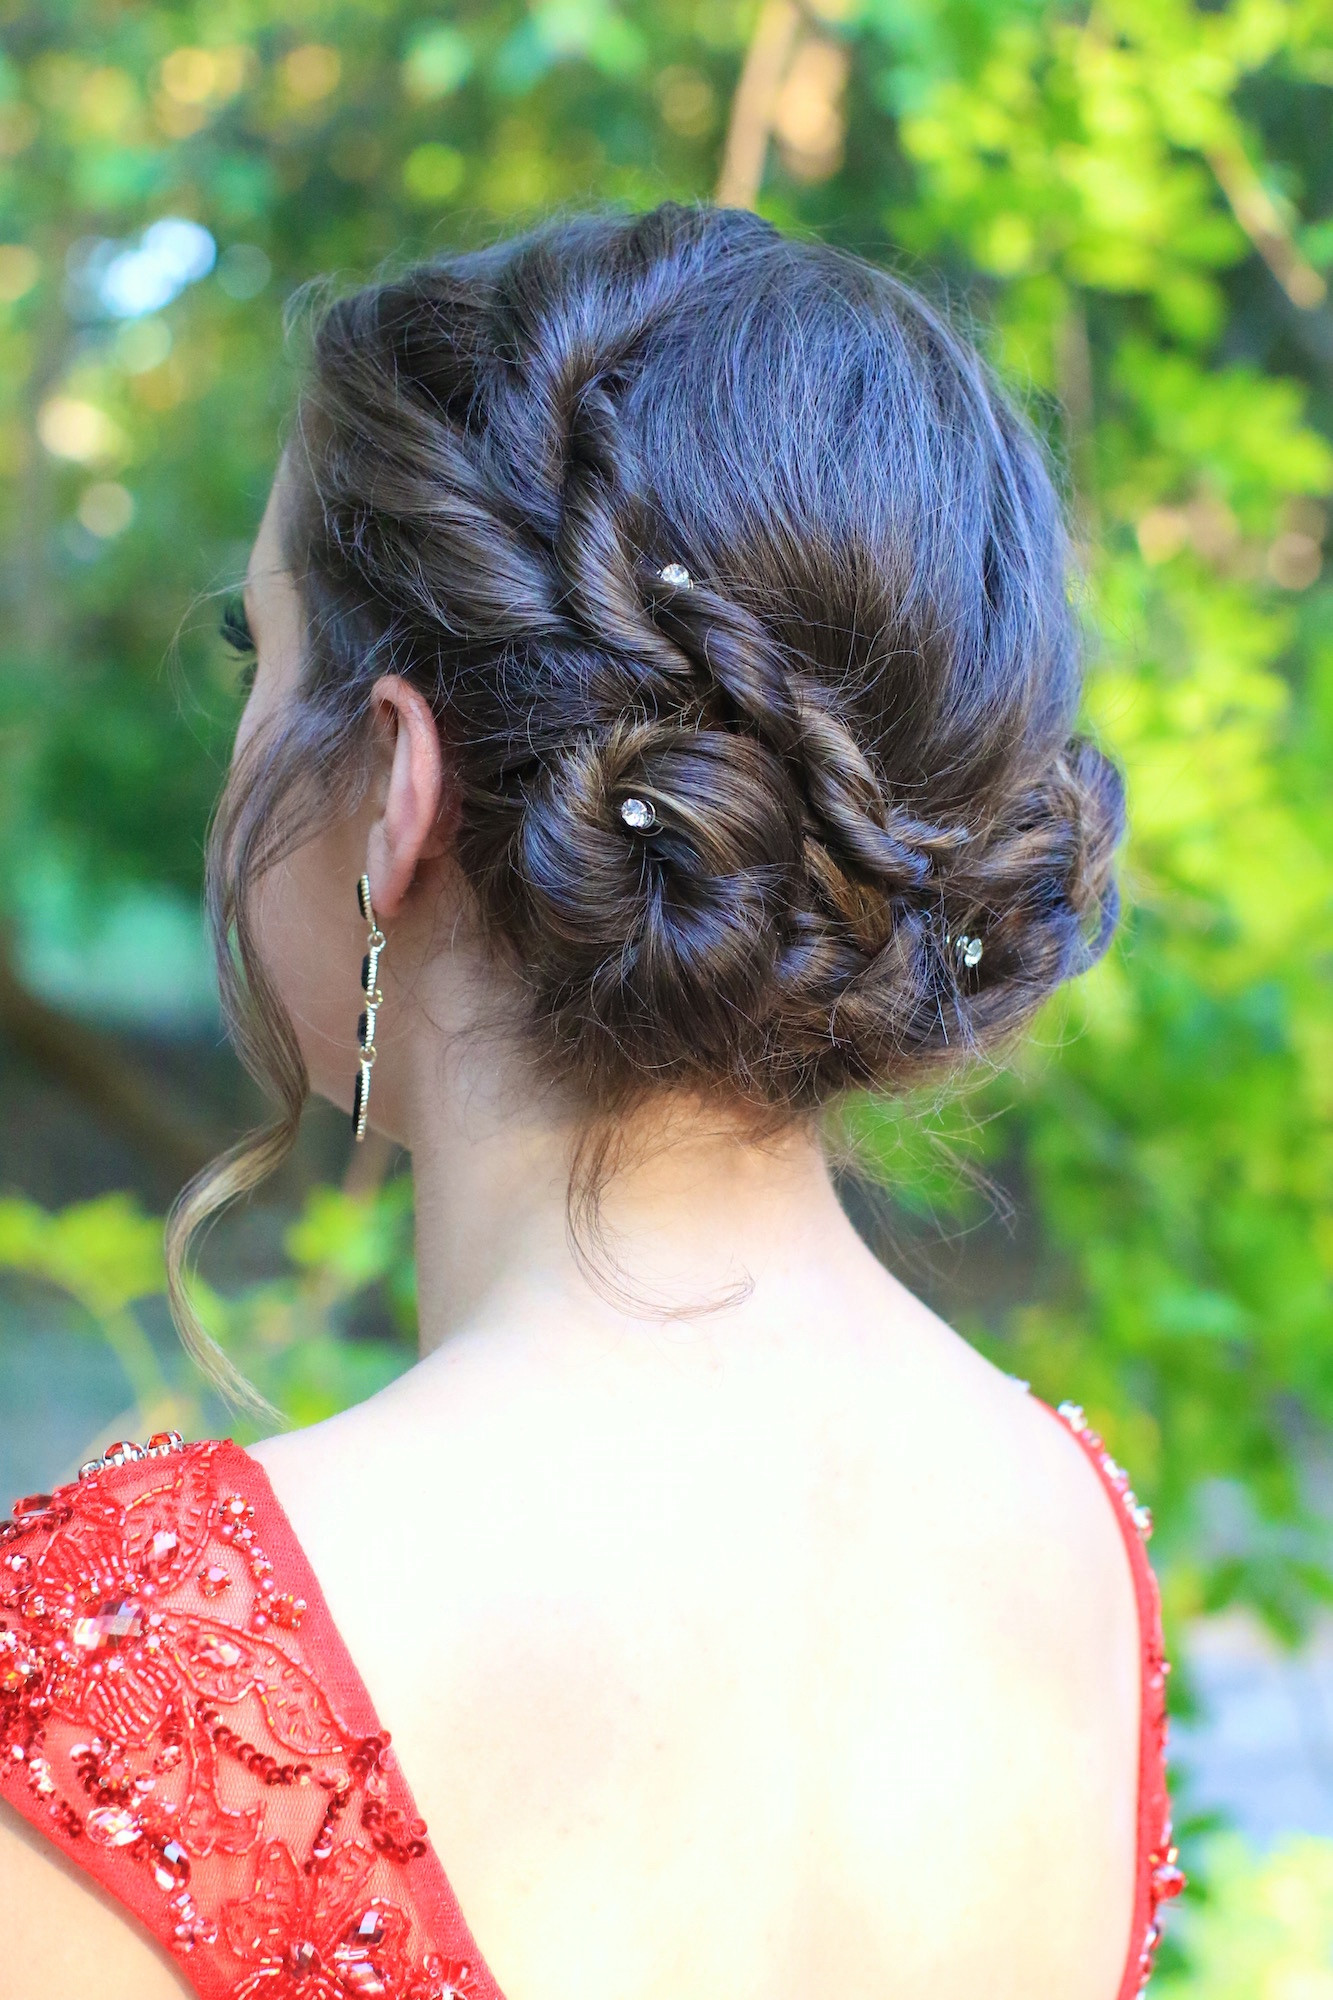 Prom Updo Hairstyles Short Hair
 Rope Twist Updo Home ing Hairstyles